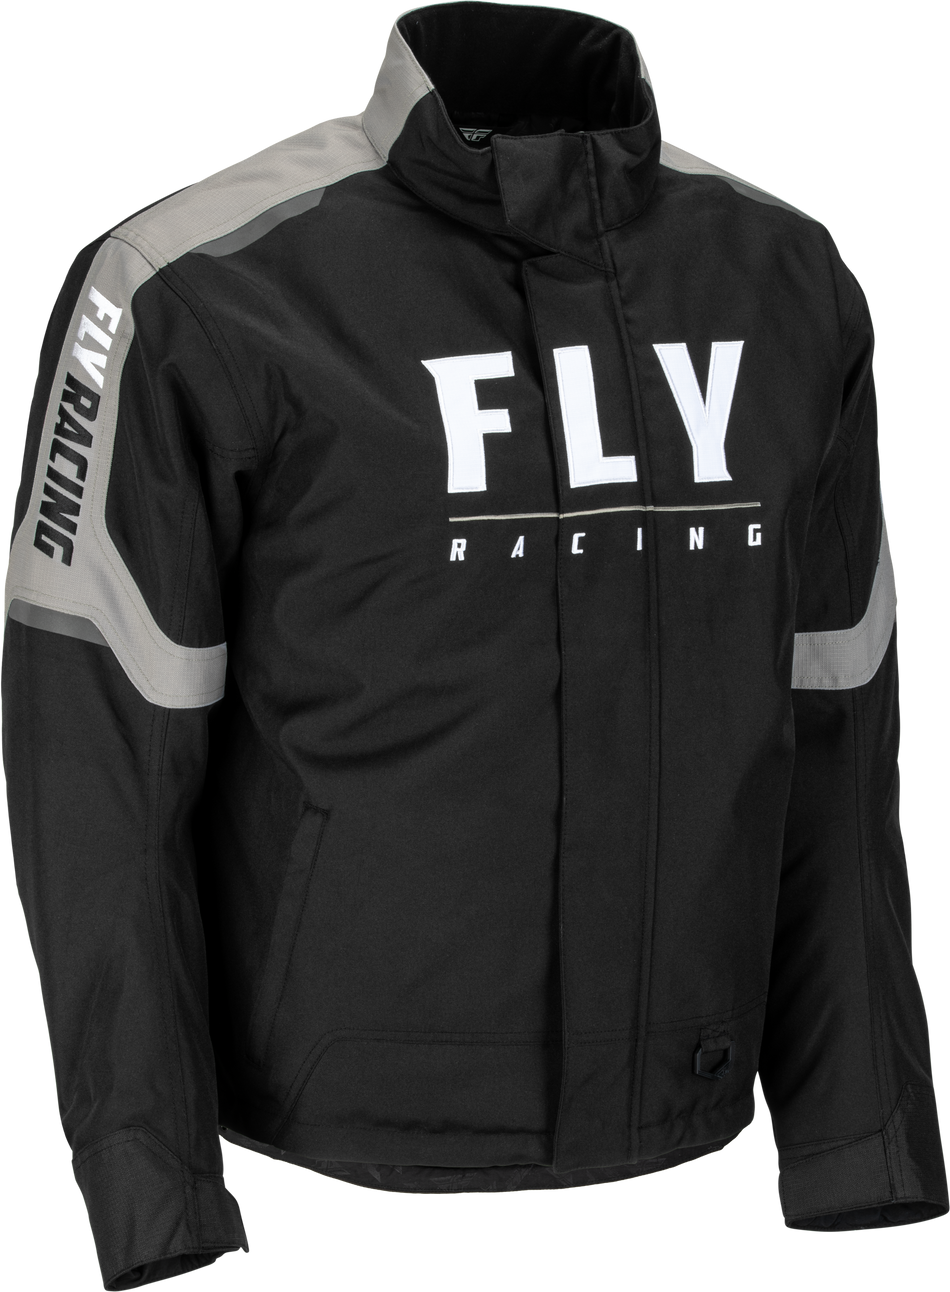 FLY RACING Outpost Jacket Black/Grey Md 470-4143M